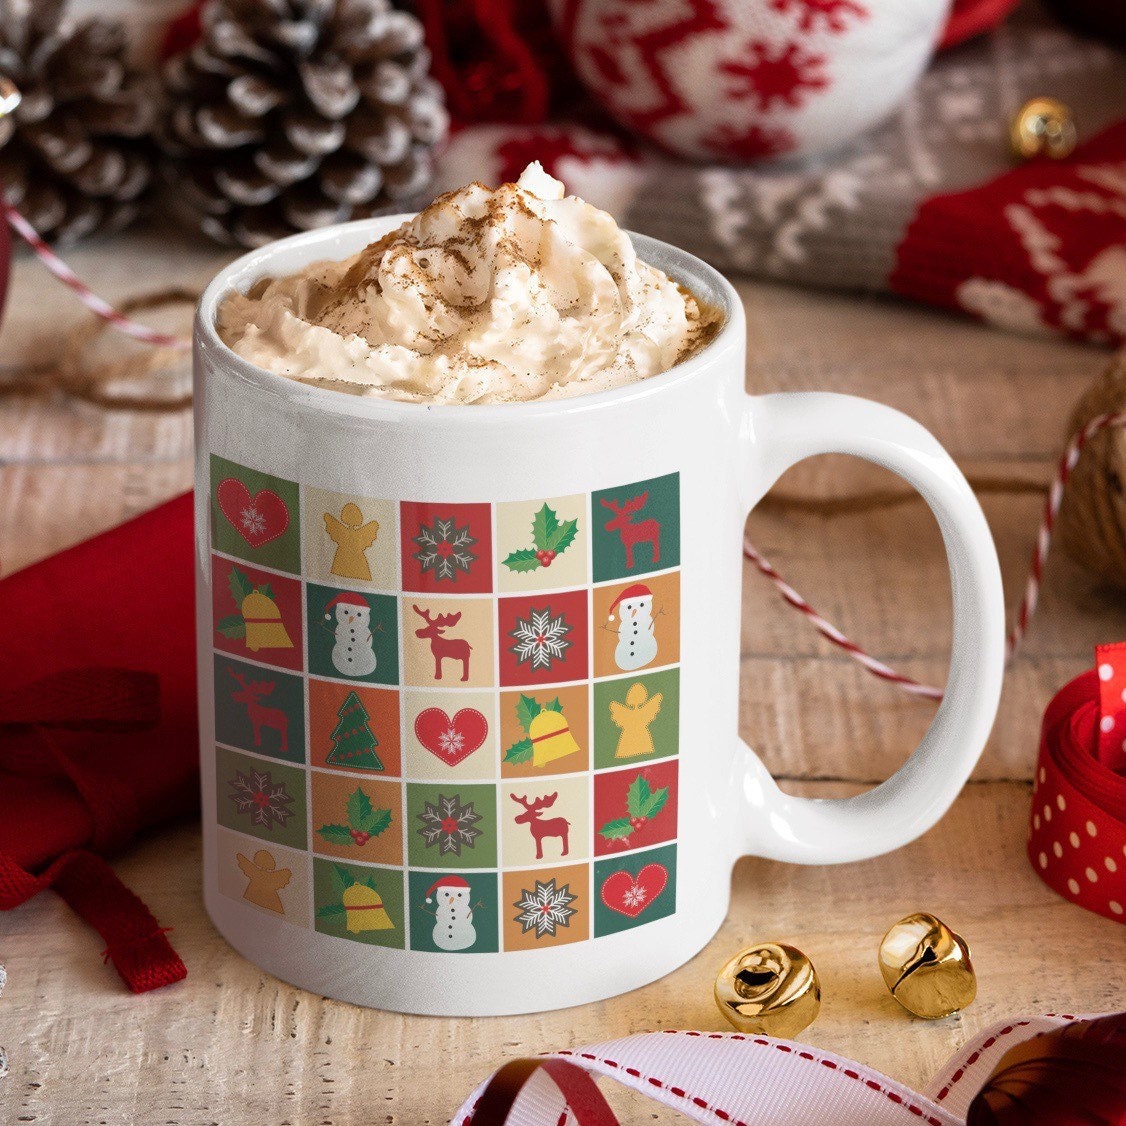 Starbucks Reusable Cup Personalised Hot Coffee Cup Travel Mug secret Santa  Stocking Filler Gift for Her White Cup Coffee 